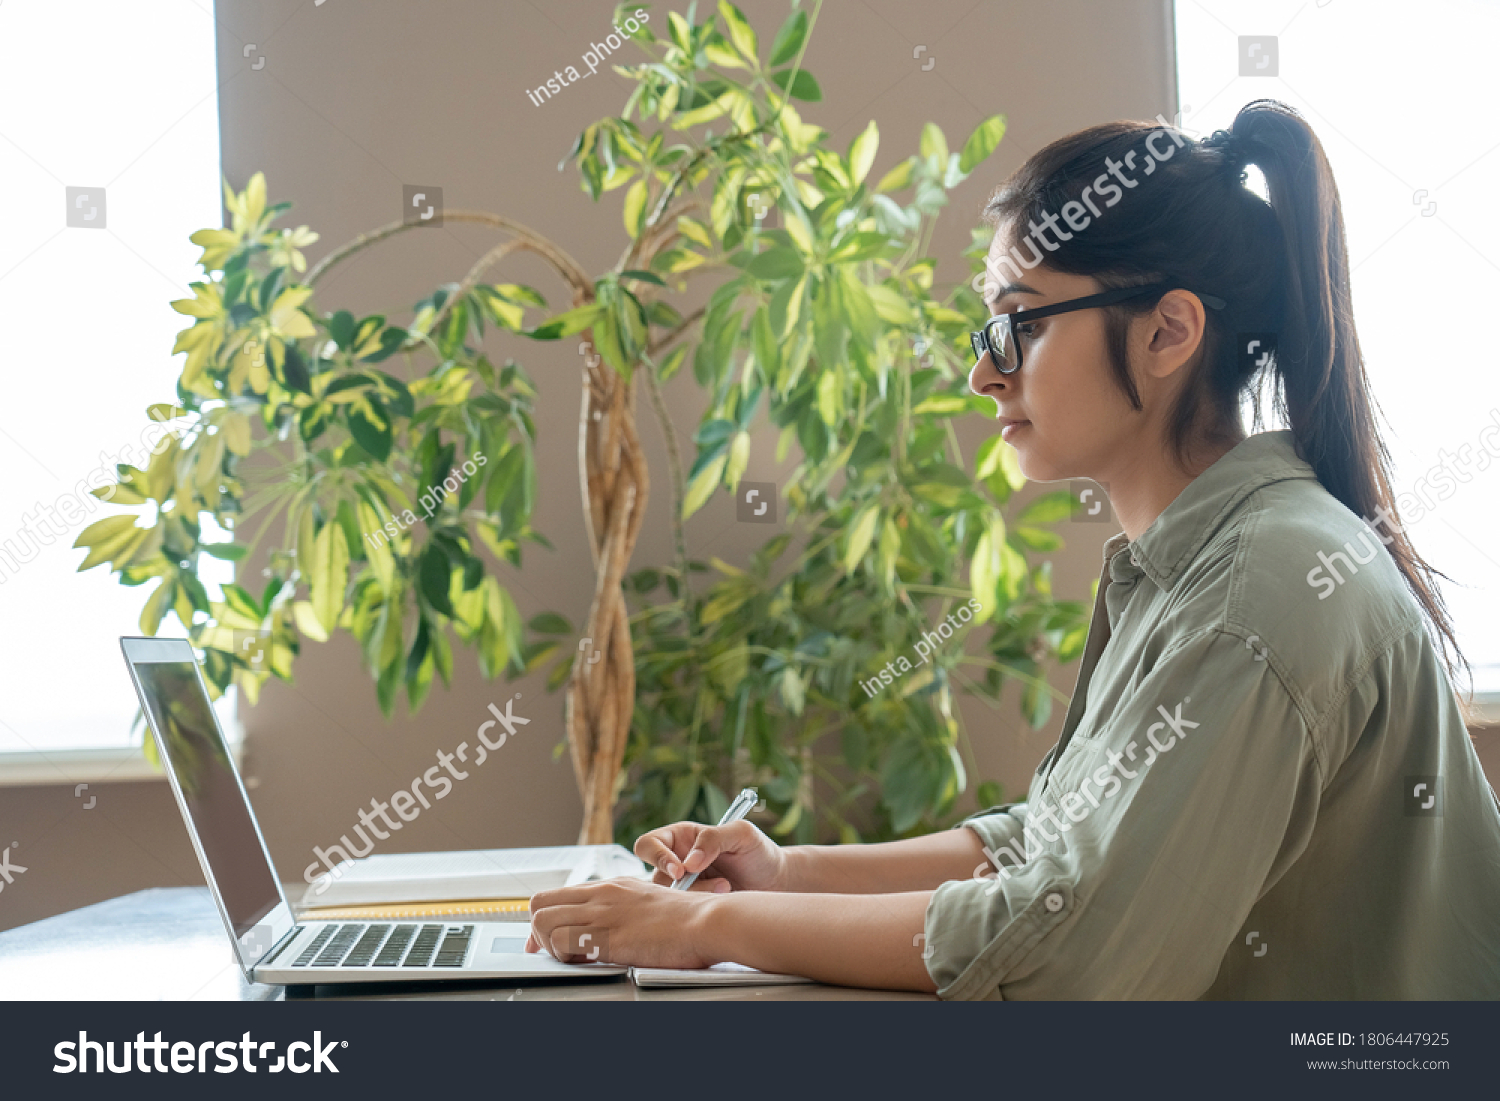 Indian woman online teacher, student, remote worker video conference calling, watching webinar training working studying at home office classroom. Female tutor giving webcam online class on laptop. #1806447925